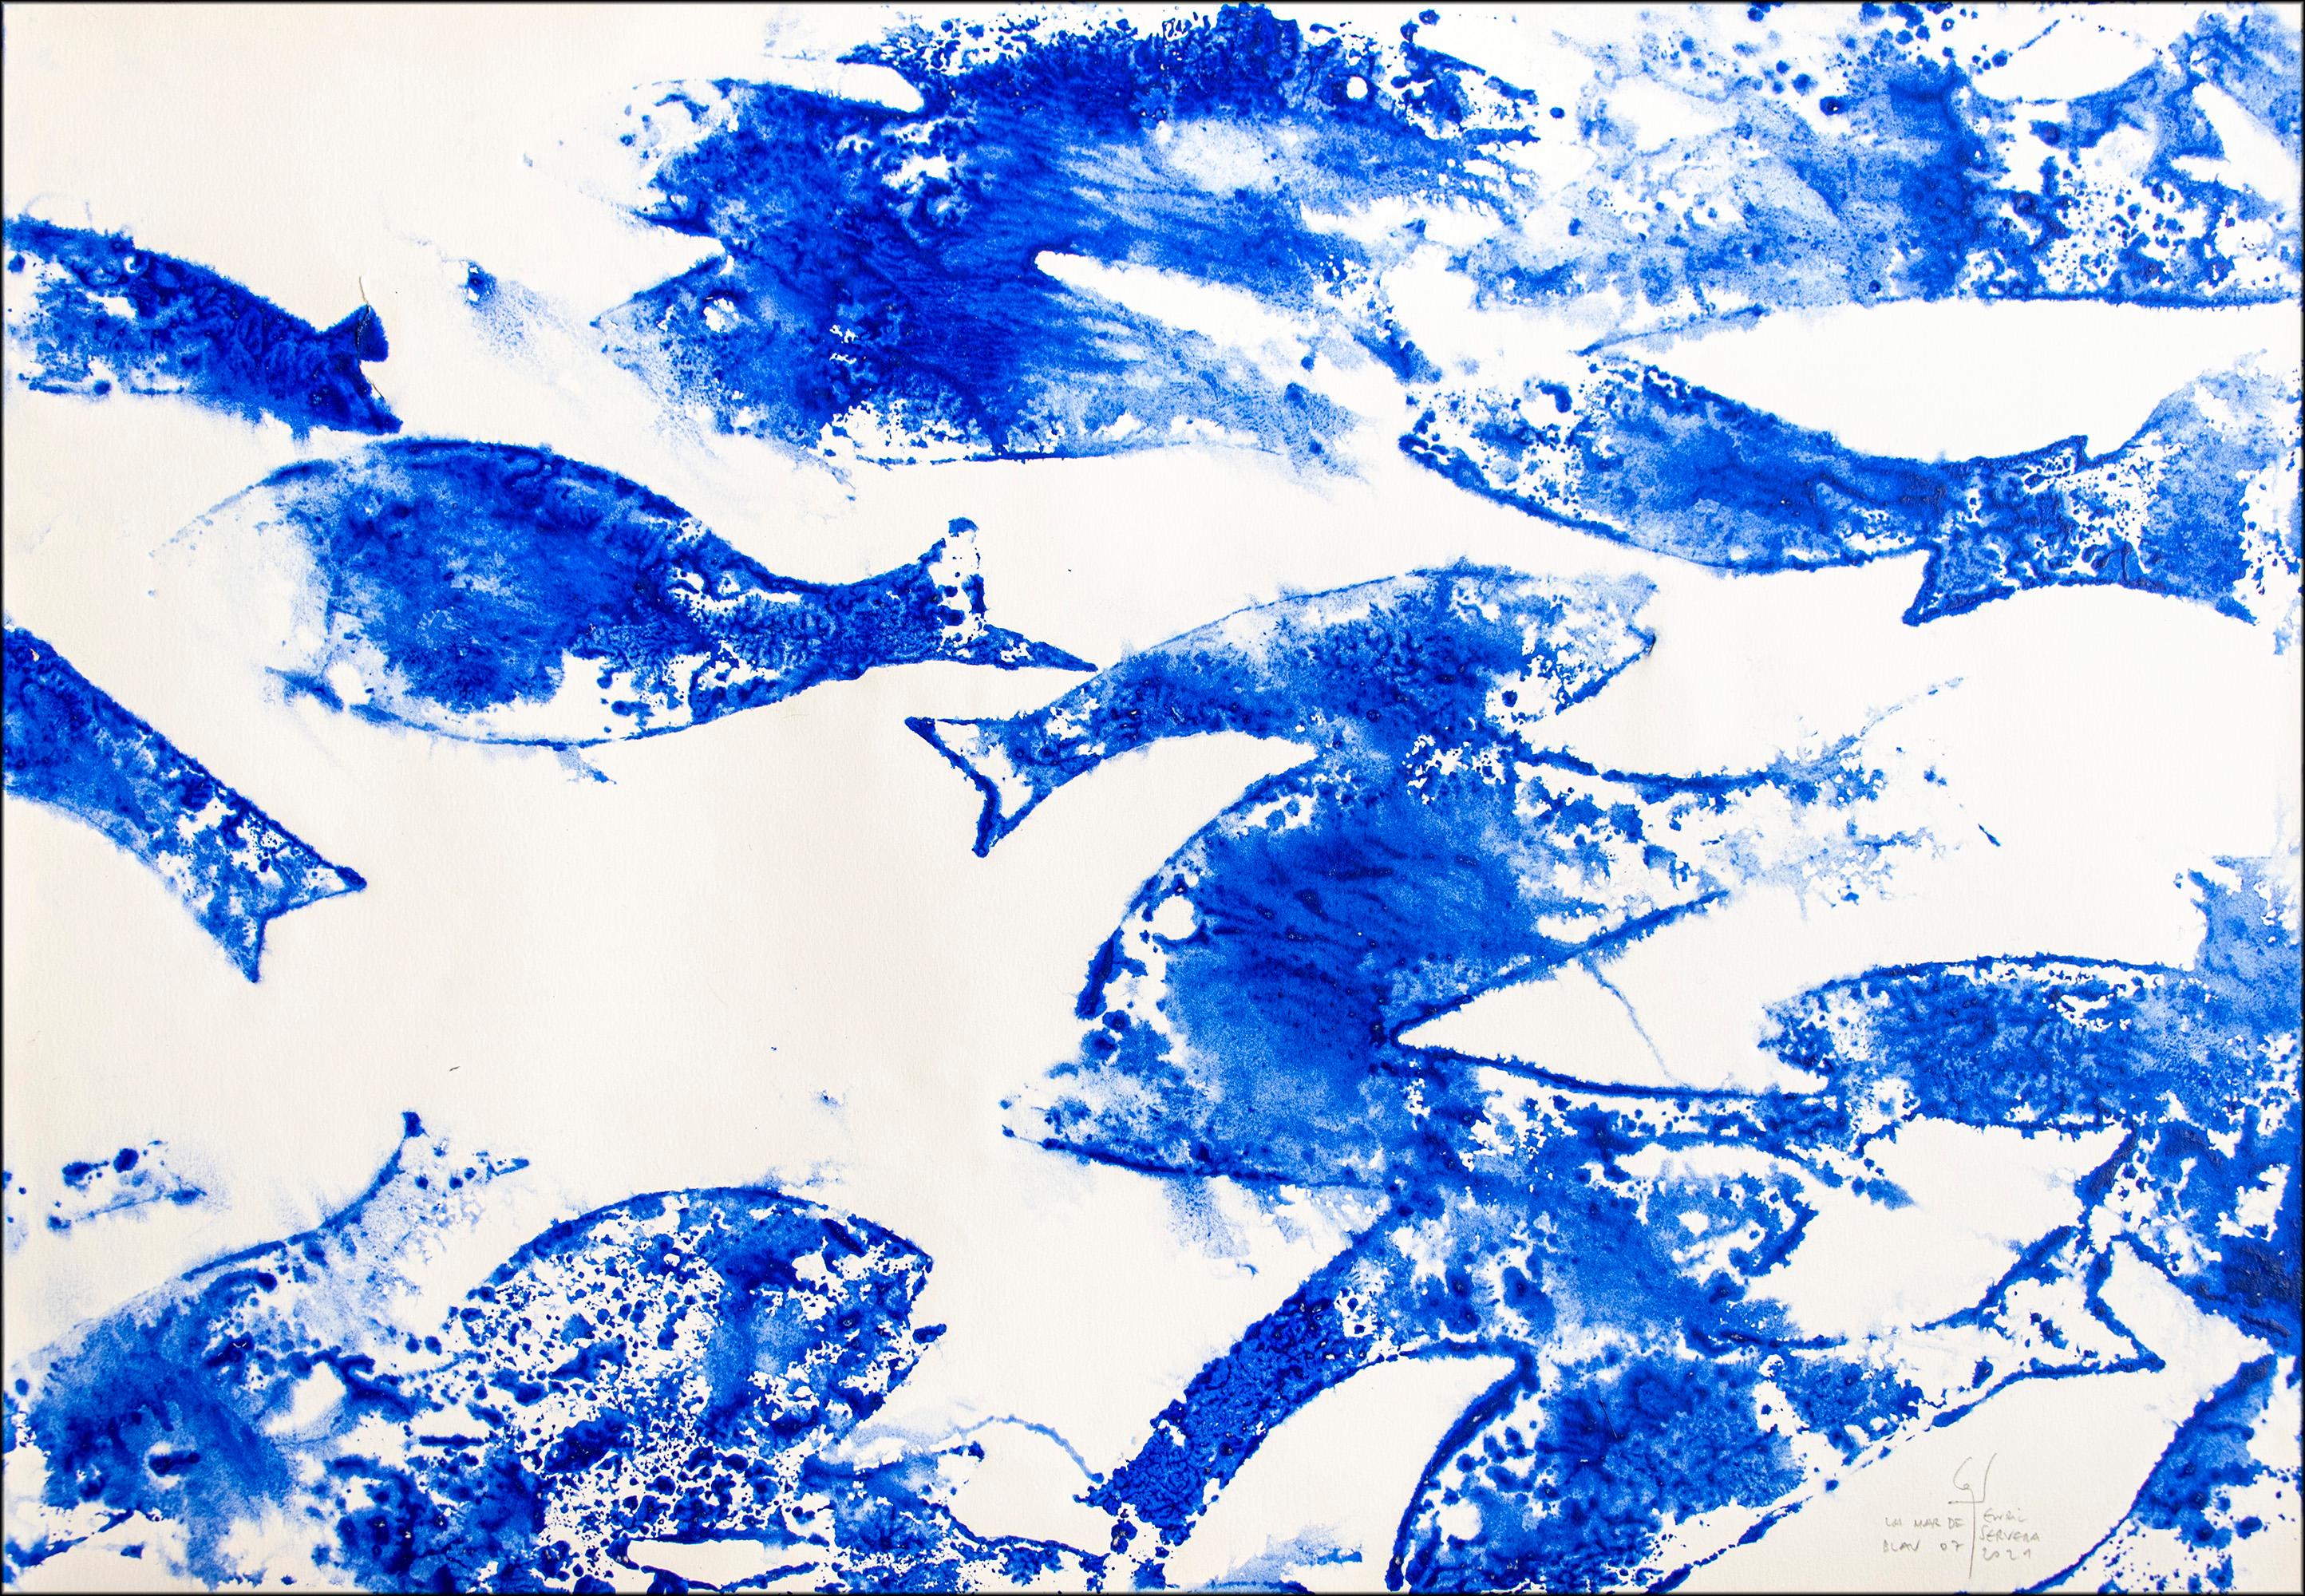 Sea of Blues N7, Abstract Blue and White Fish Patterns, Mediterranean Style 